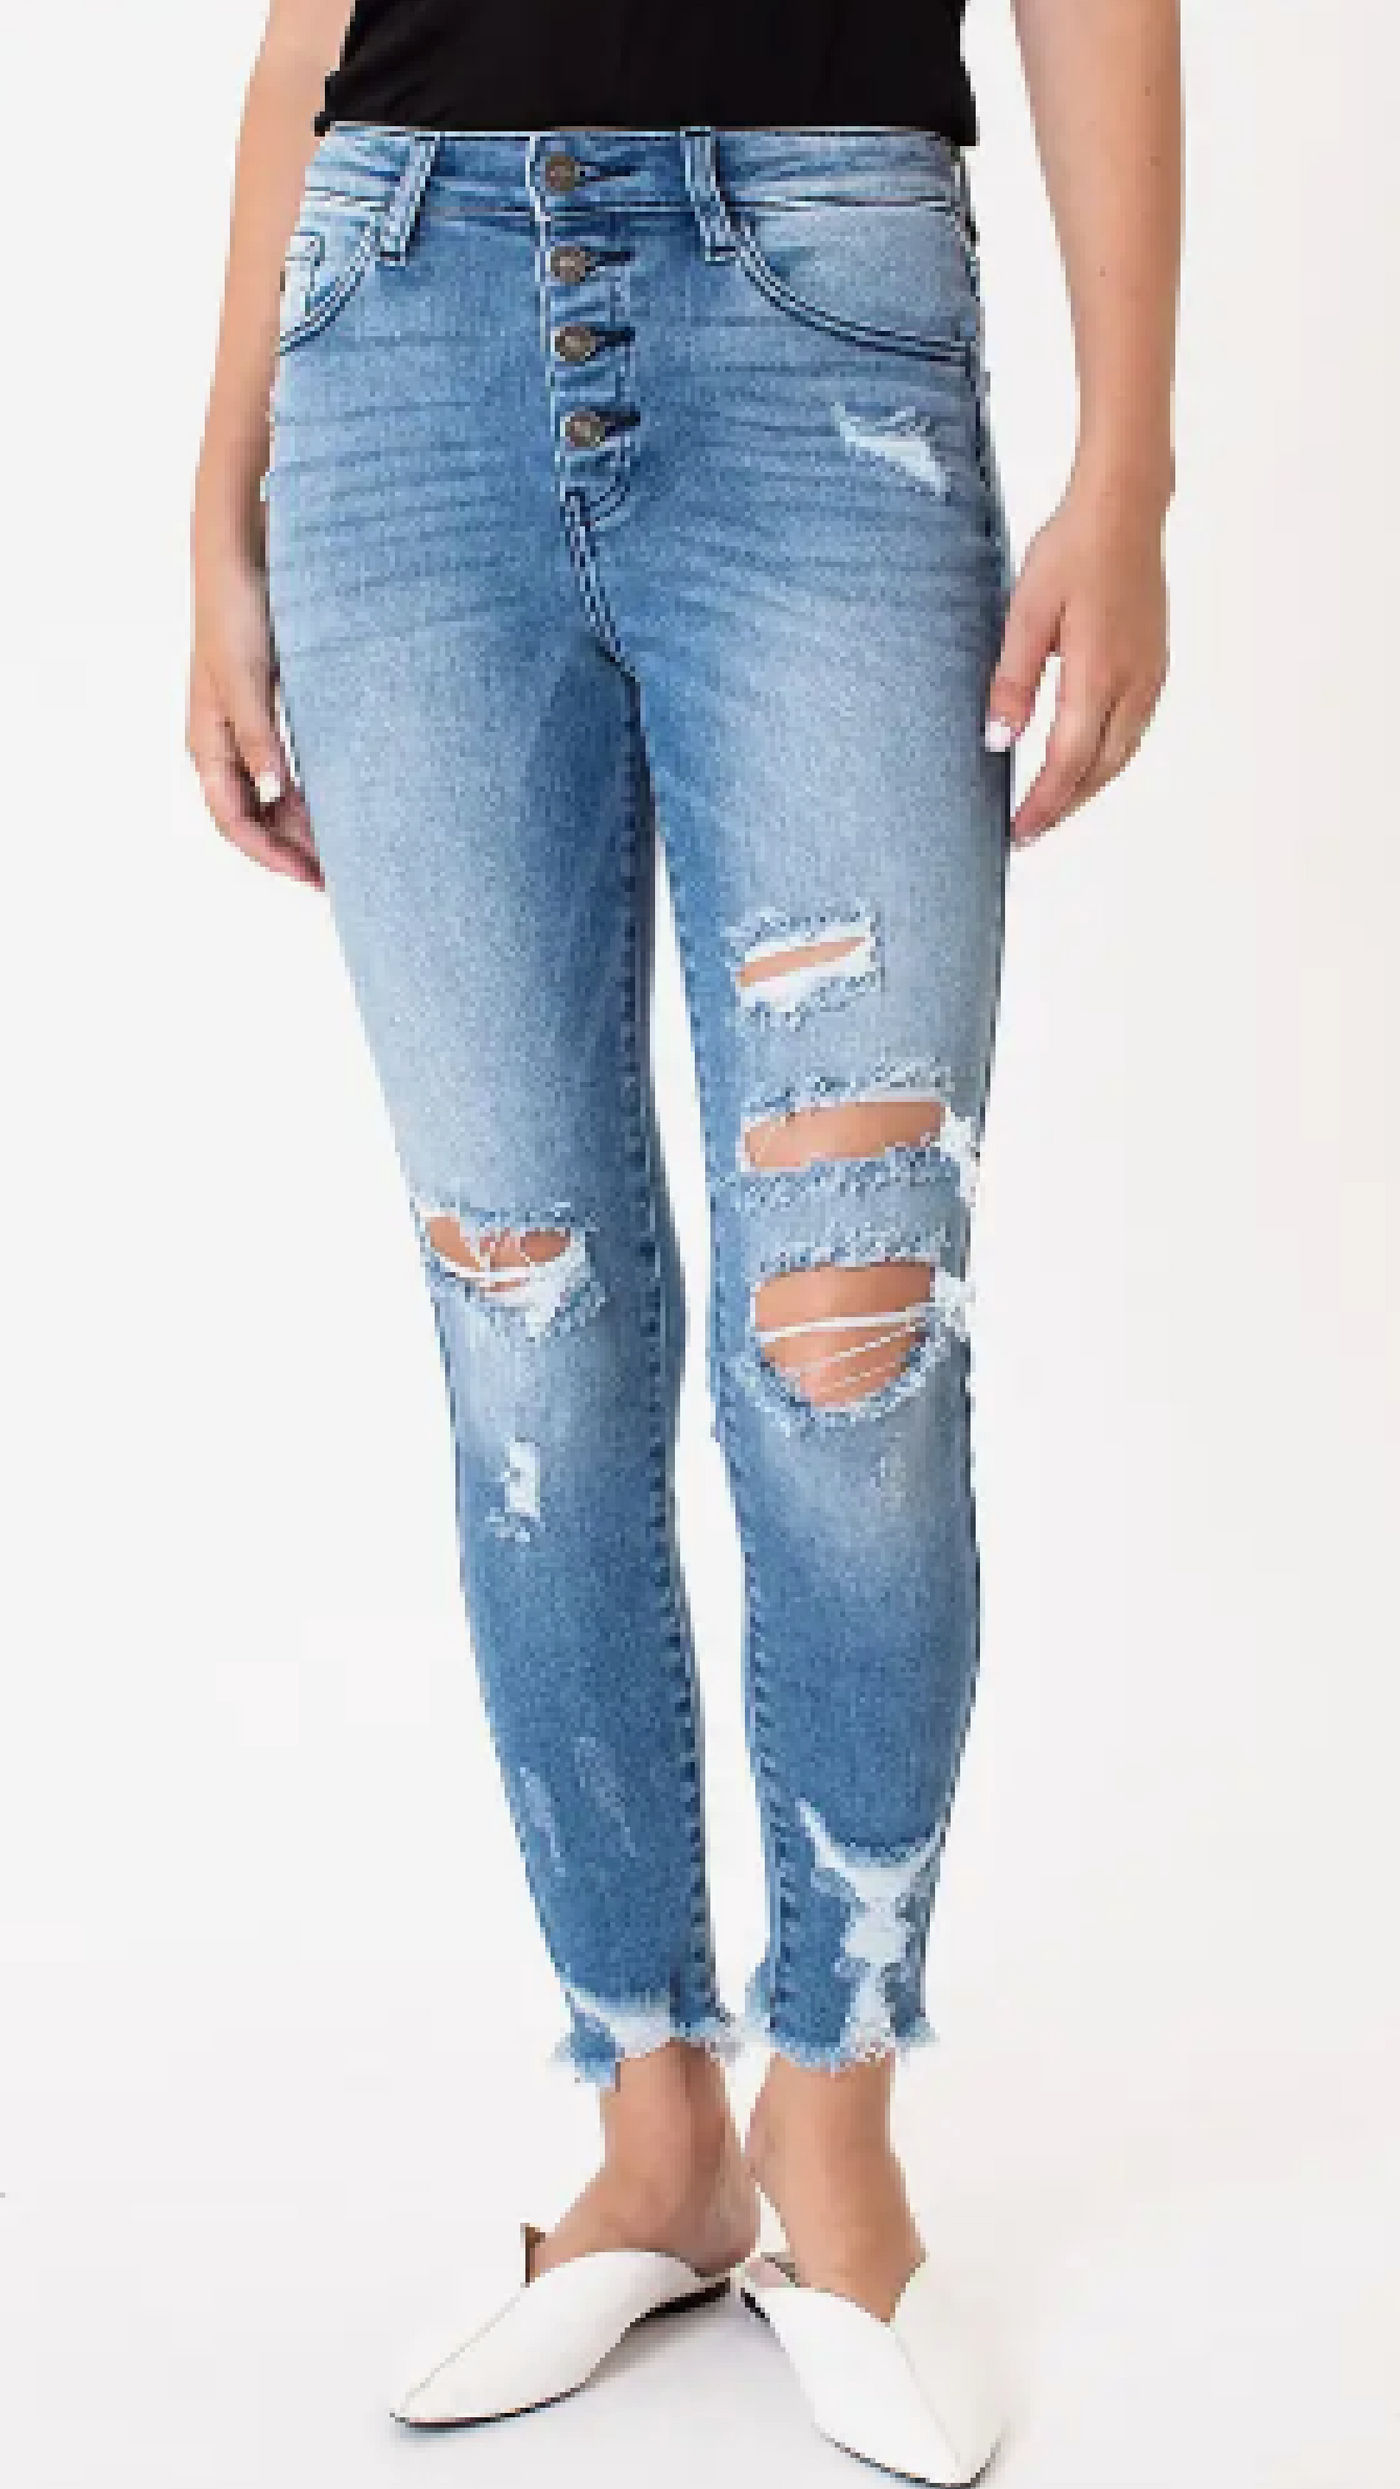 Just A Second Jeans - Piper and Hollow Boutique